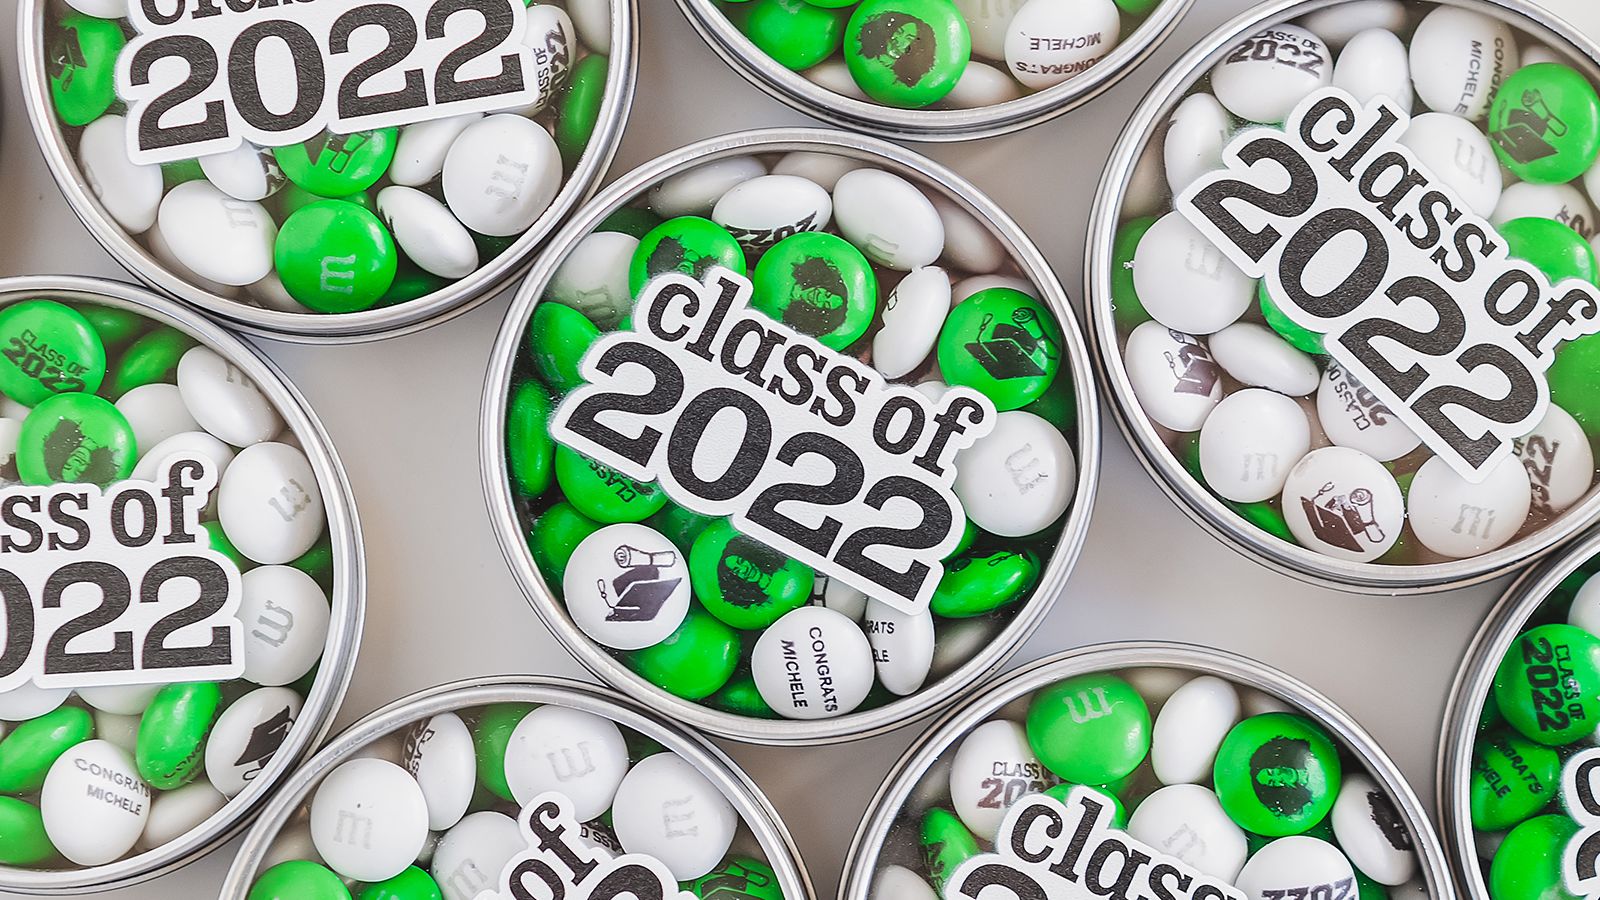 Personalized M&M'S for Graduation and Mother’s Day Gifts (Up to 50% Off)